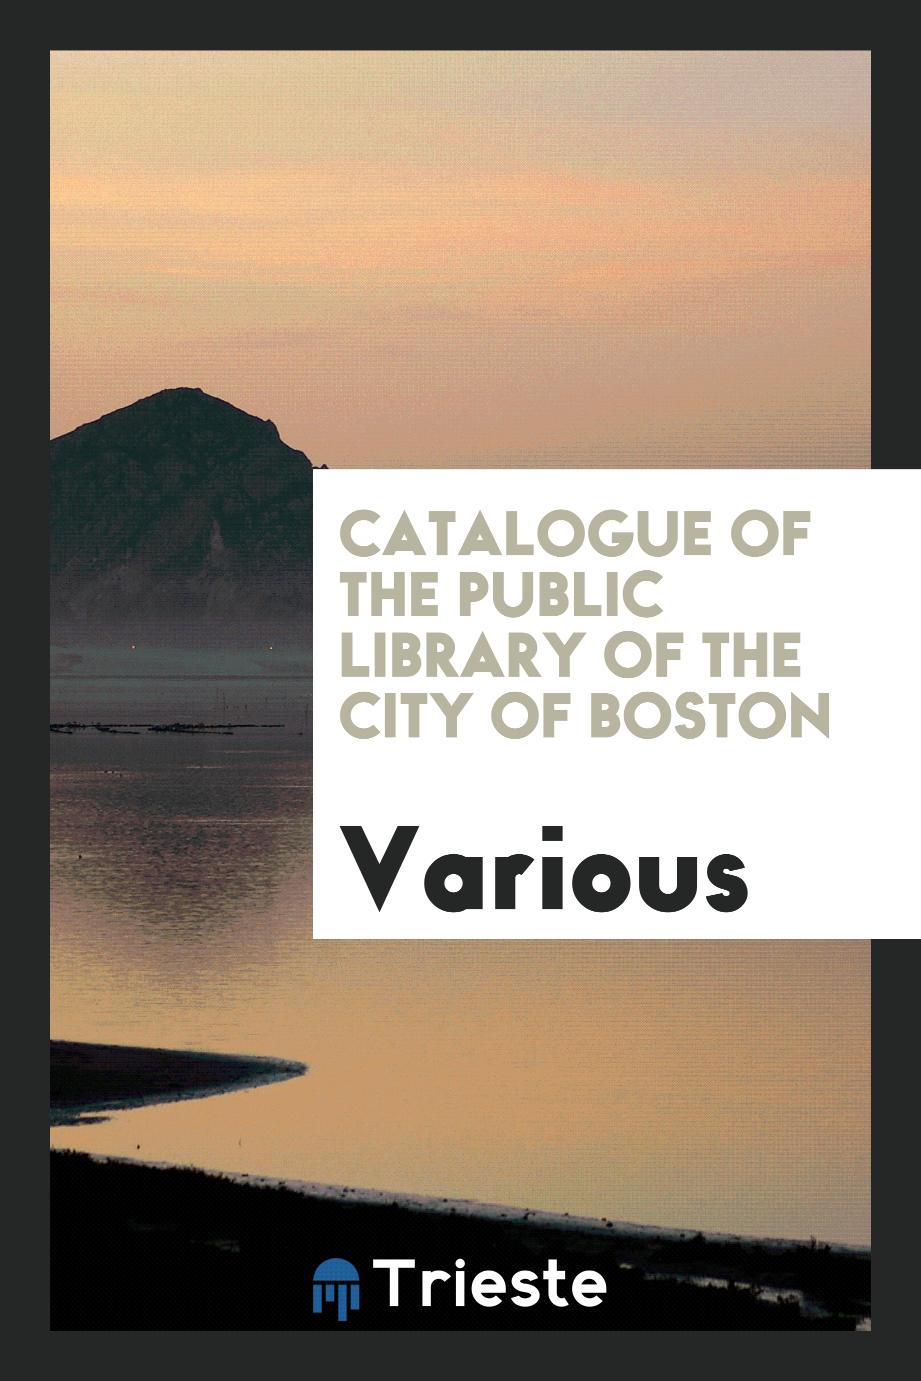 Catalogue of the Public Library of the City of Boston